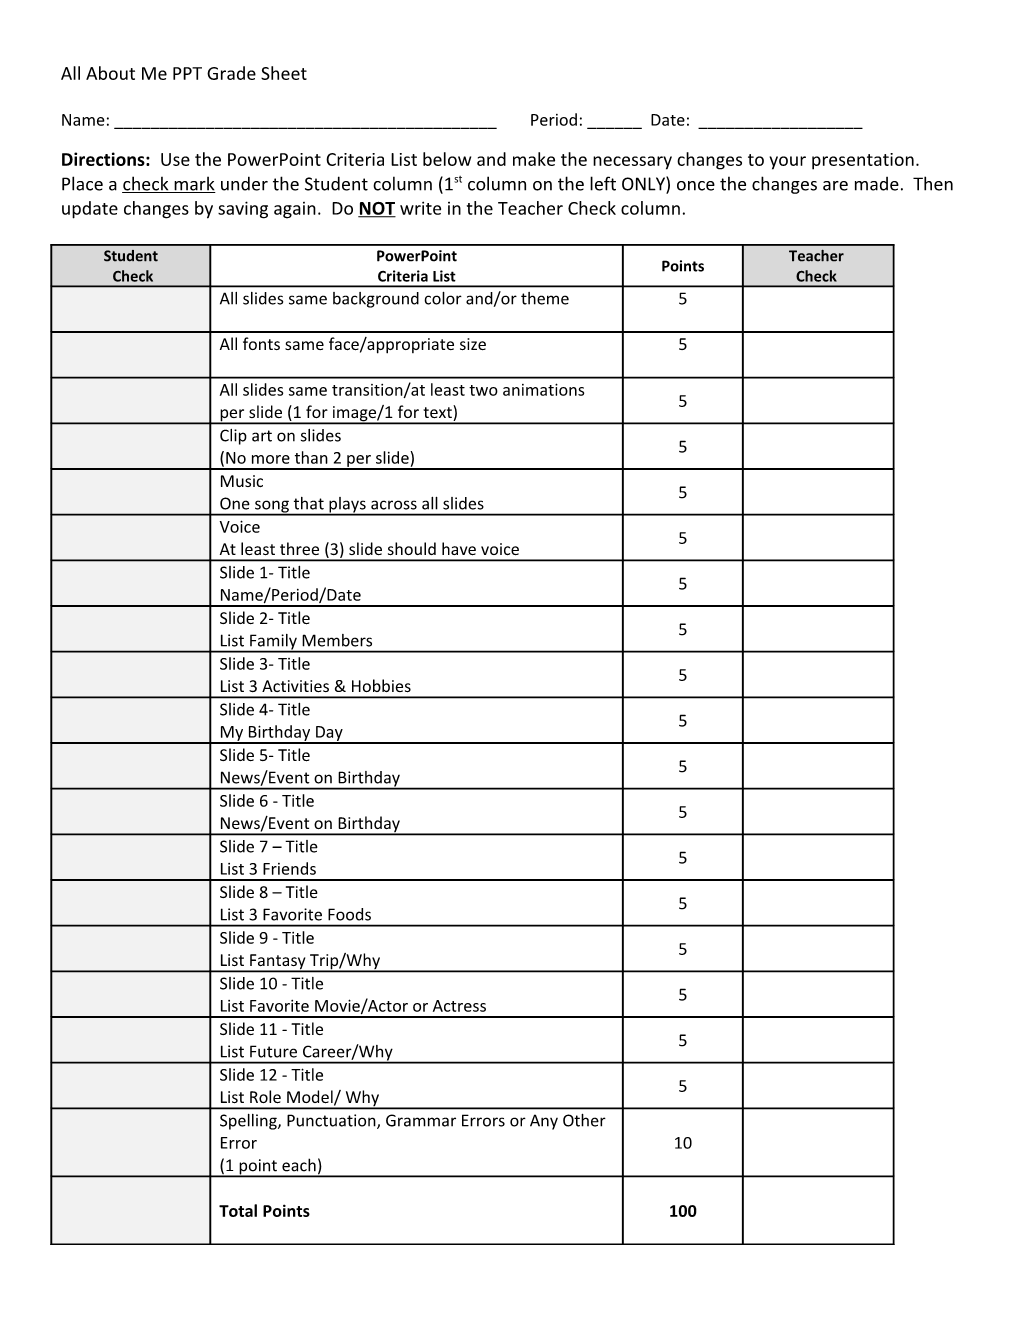 All About Me PPT Grade Sheet